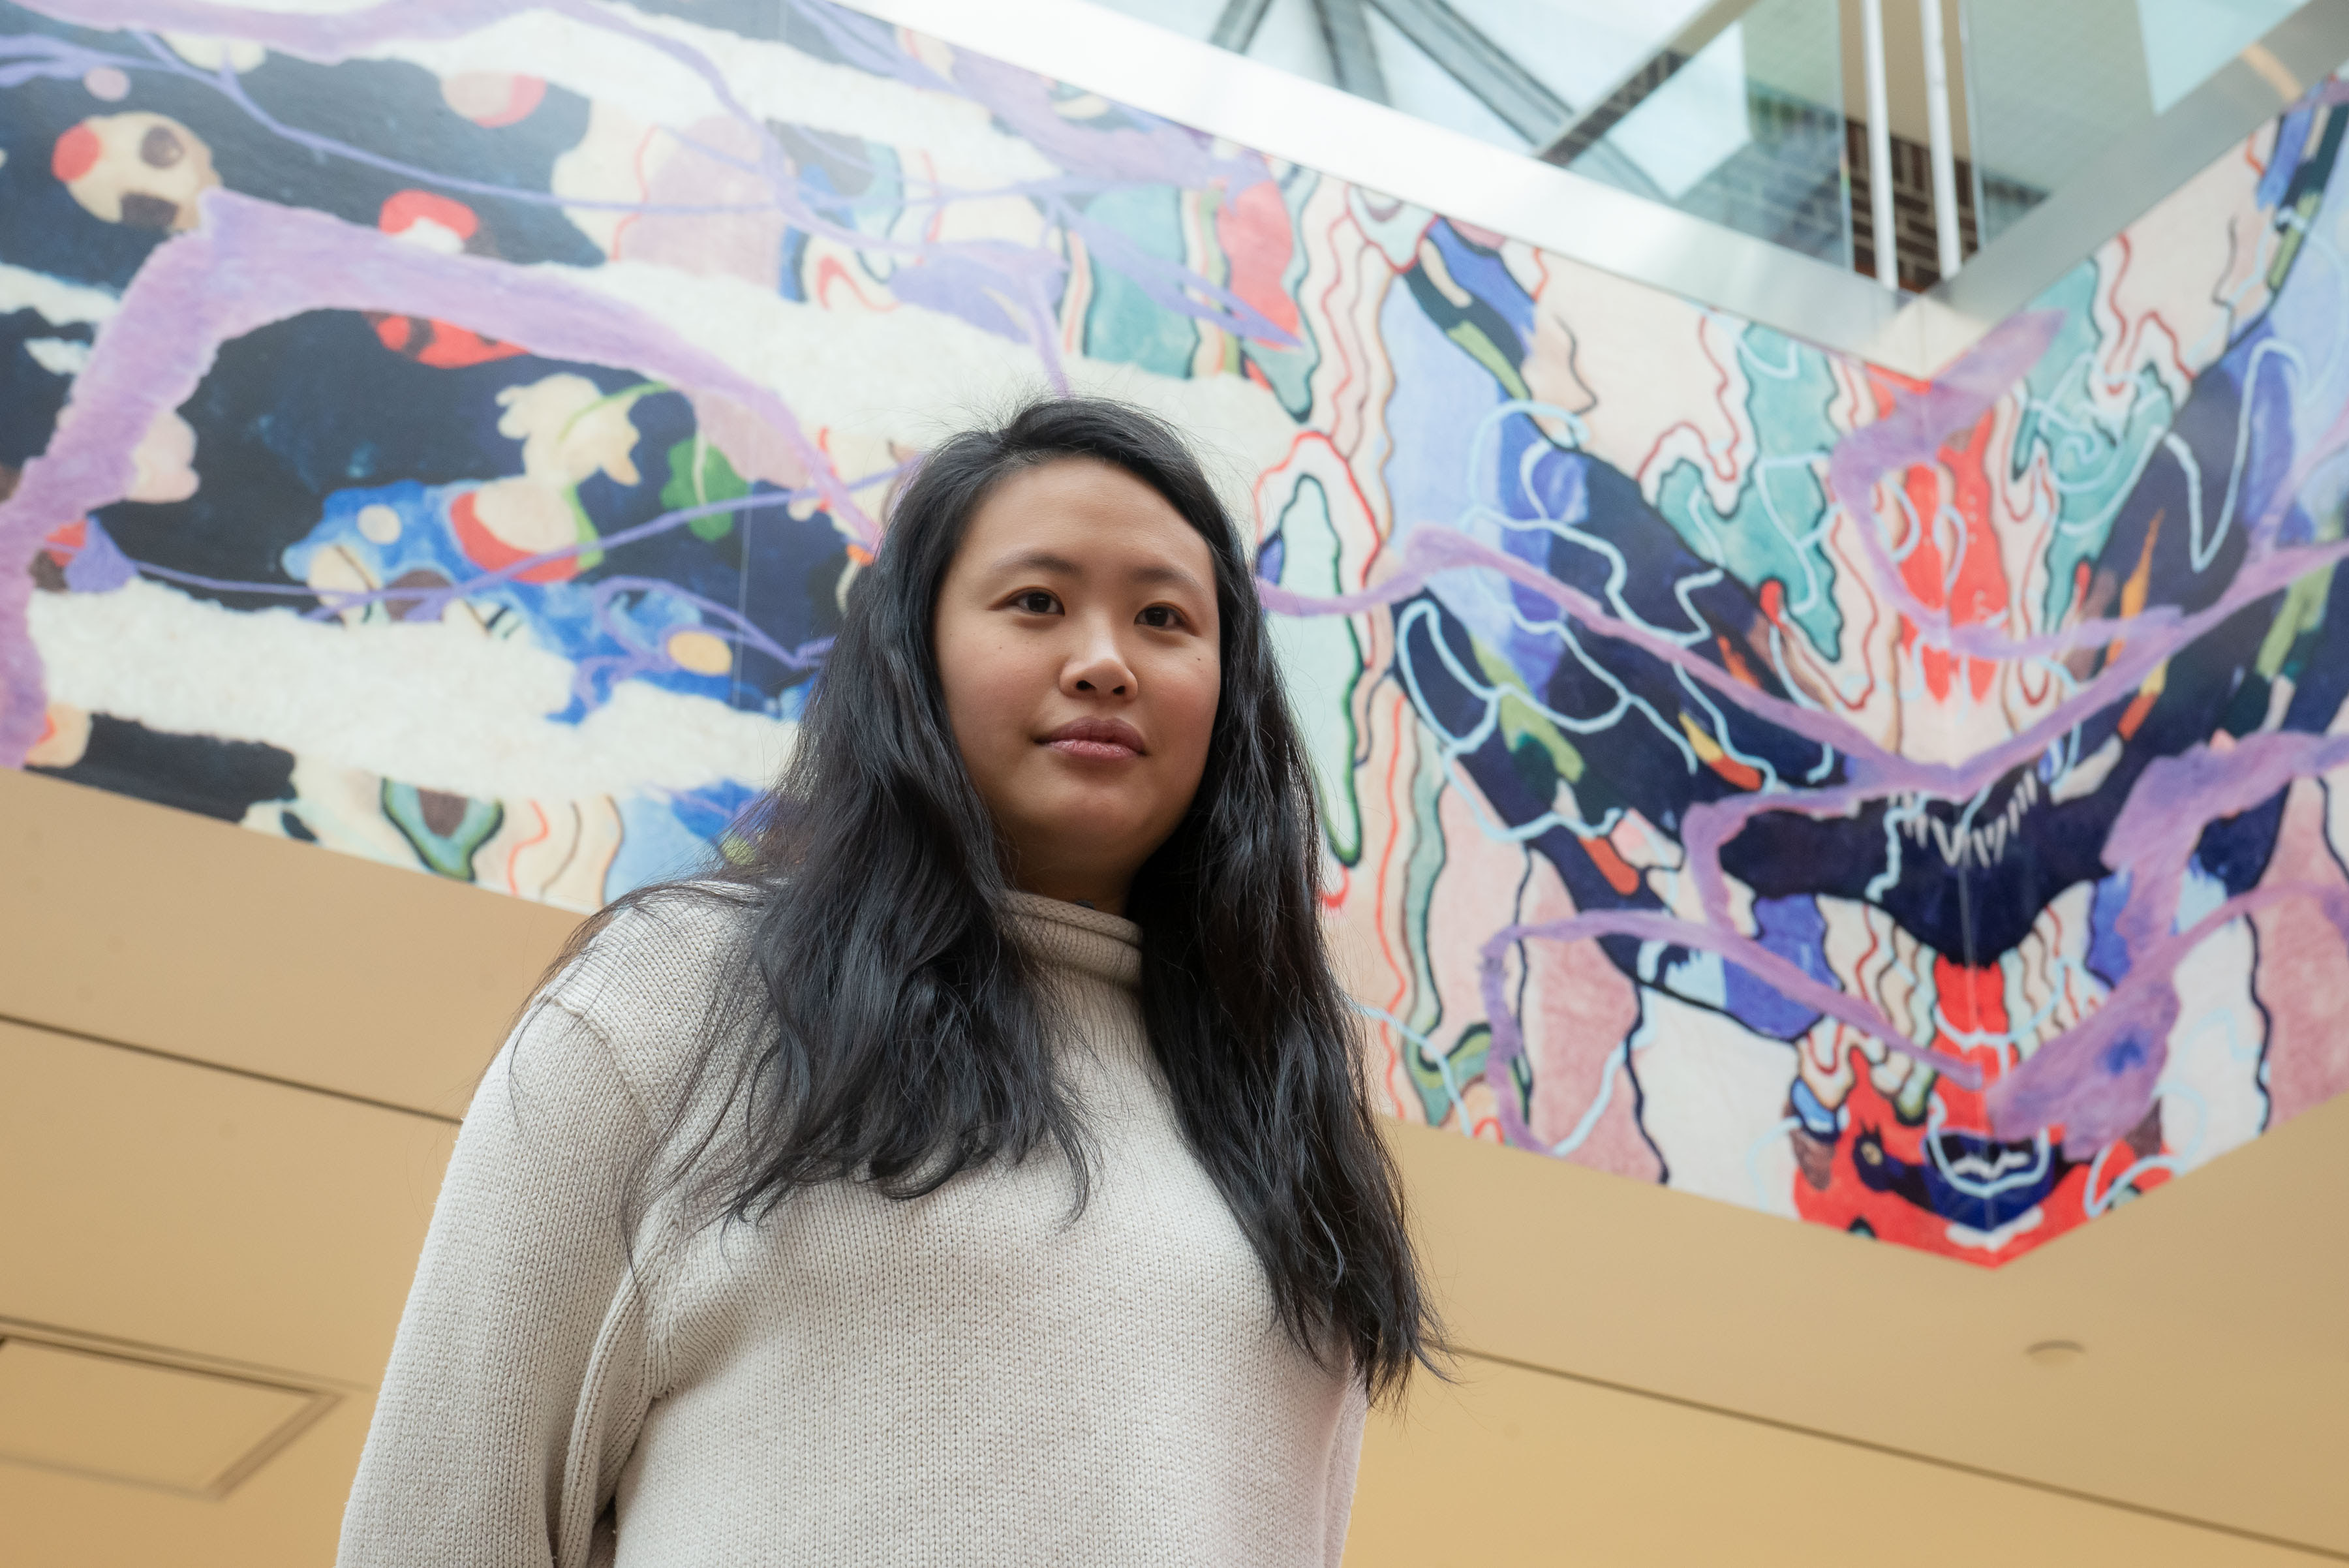 Artist Pauline Shaw is standing in Queens Center Mall with her commissioned mural visible in the background. She has long black hair and is wearing a white turtleneck. Her colorful mural features blue, purple, pink, and pink hues, combining extracted landscapes of birds and flowers with abstracted images of cells and tissues found in the human body.